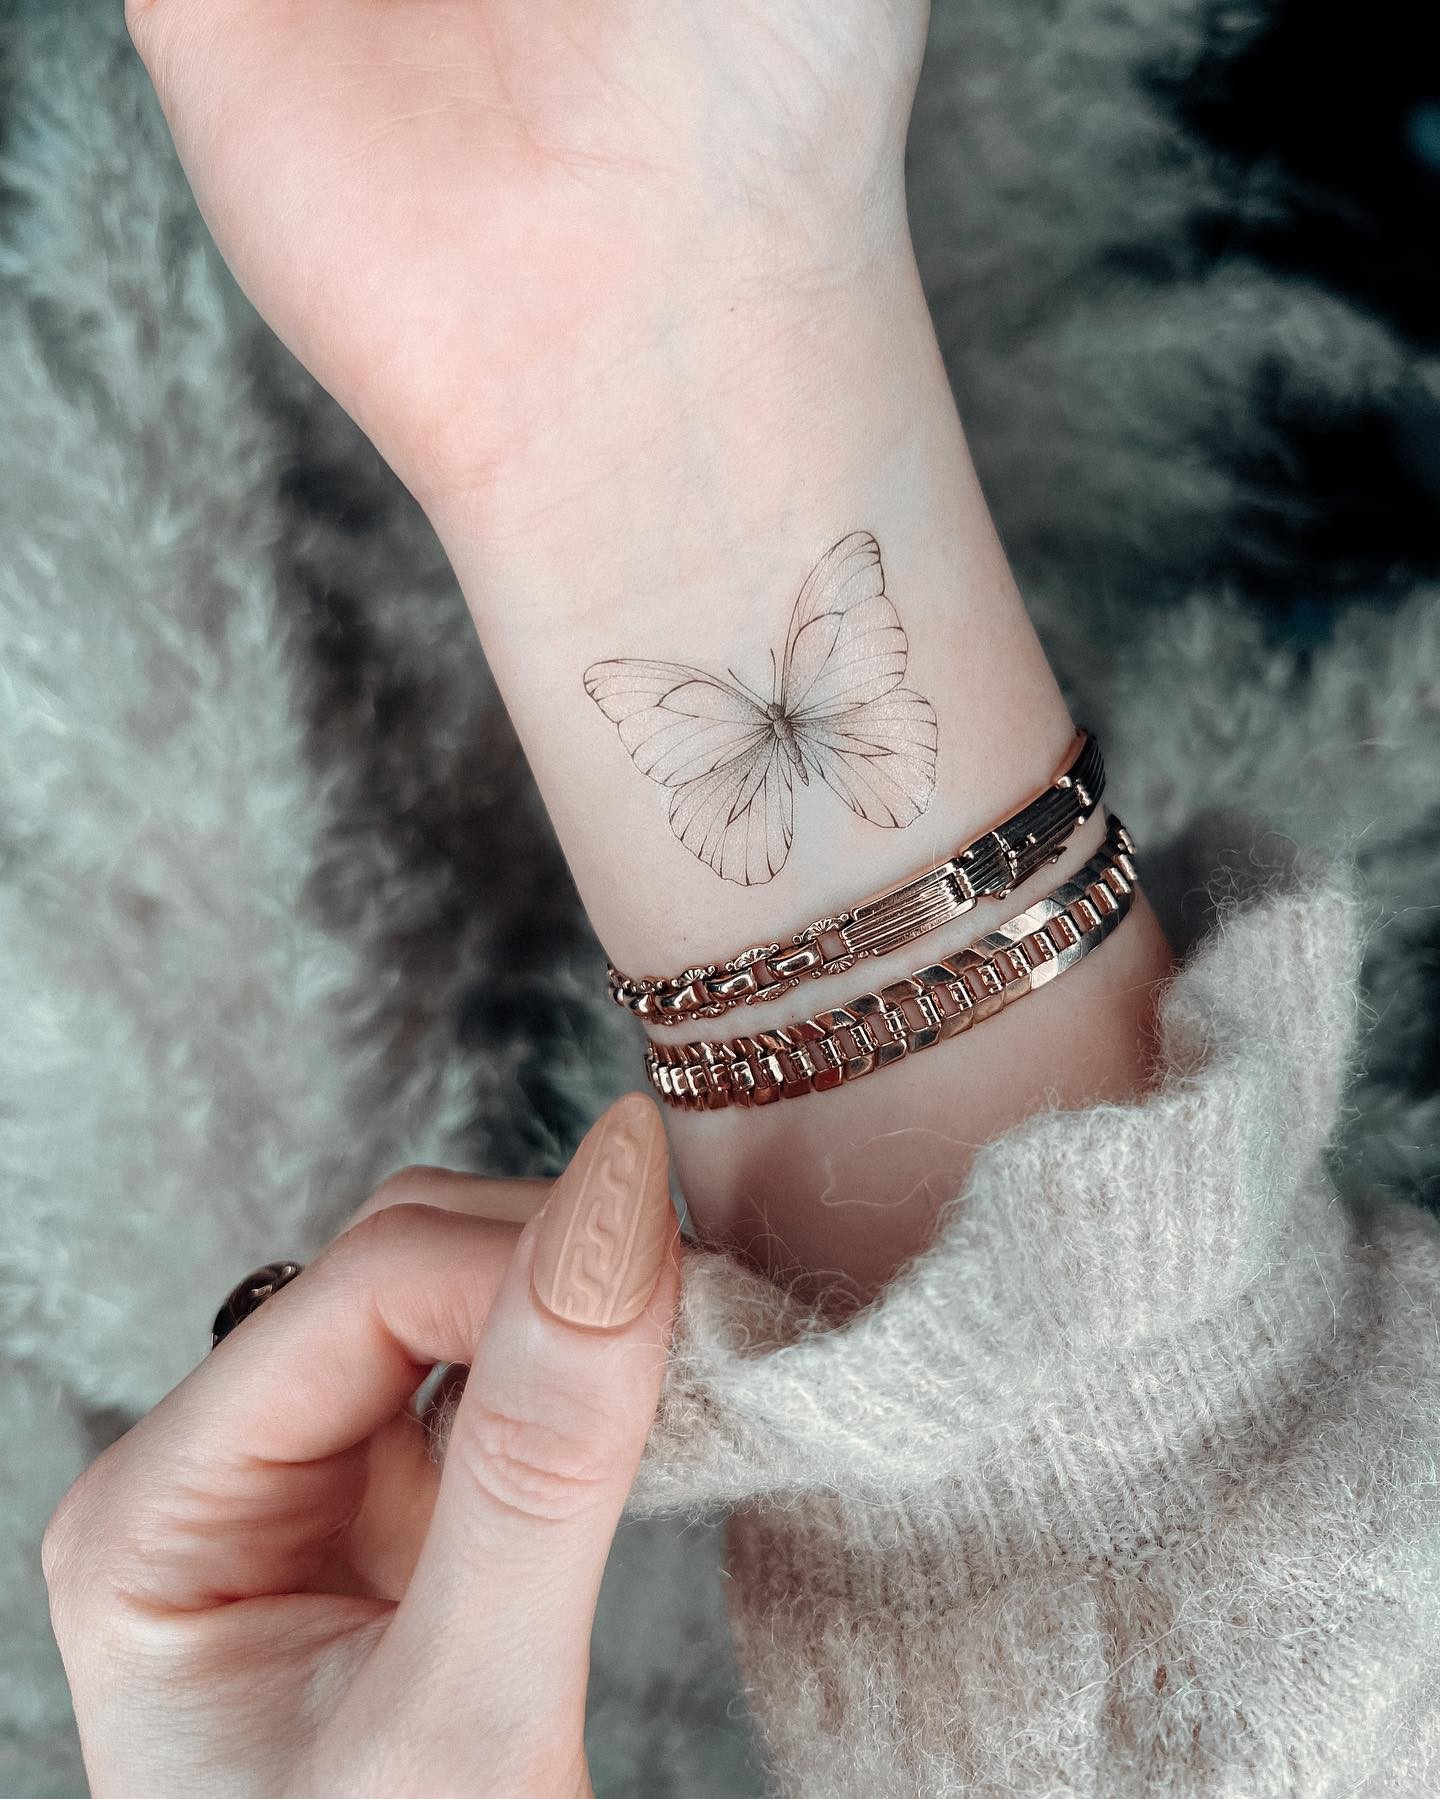 Butterfly Temporary Tattoo on Wrist